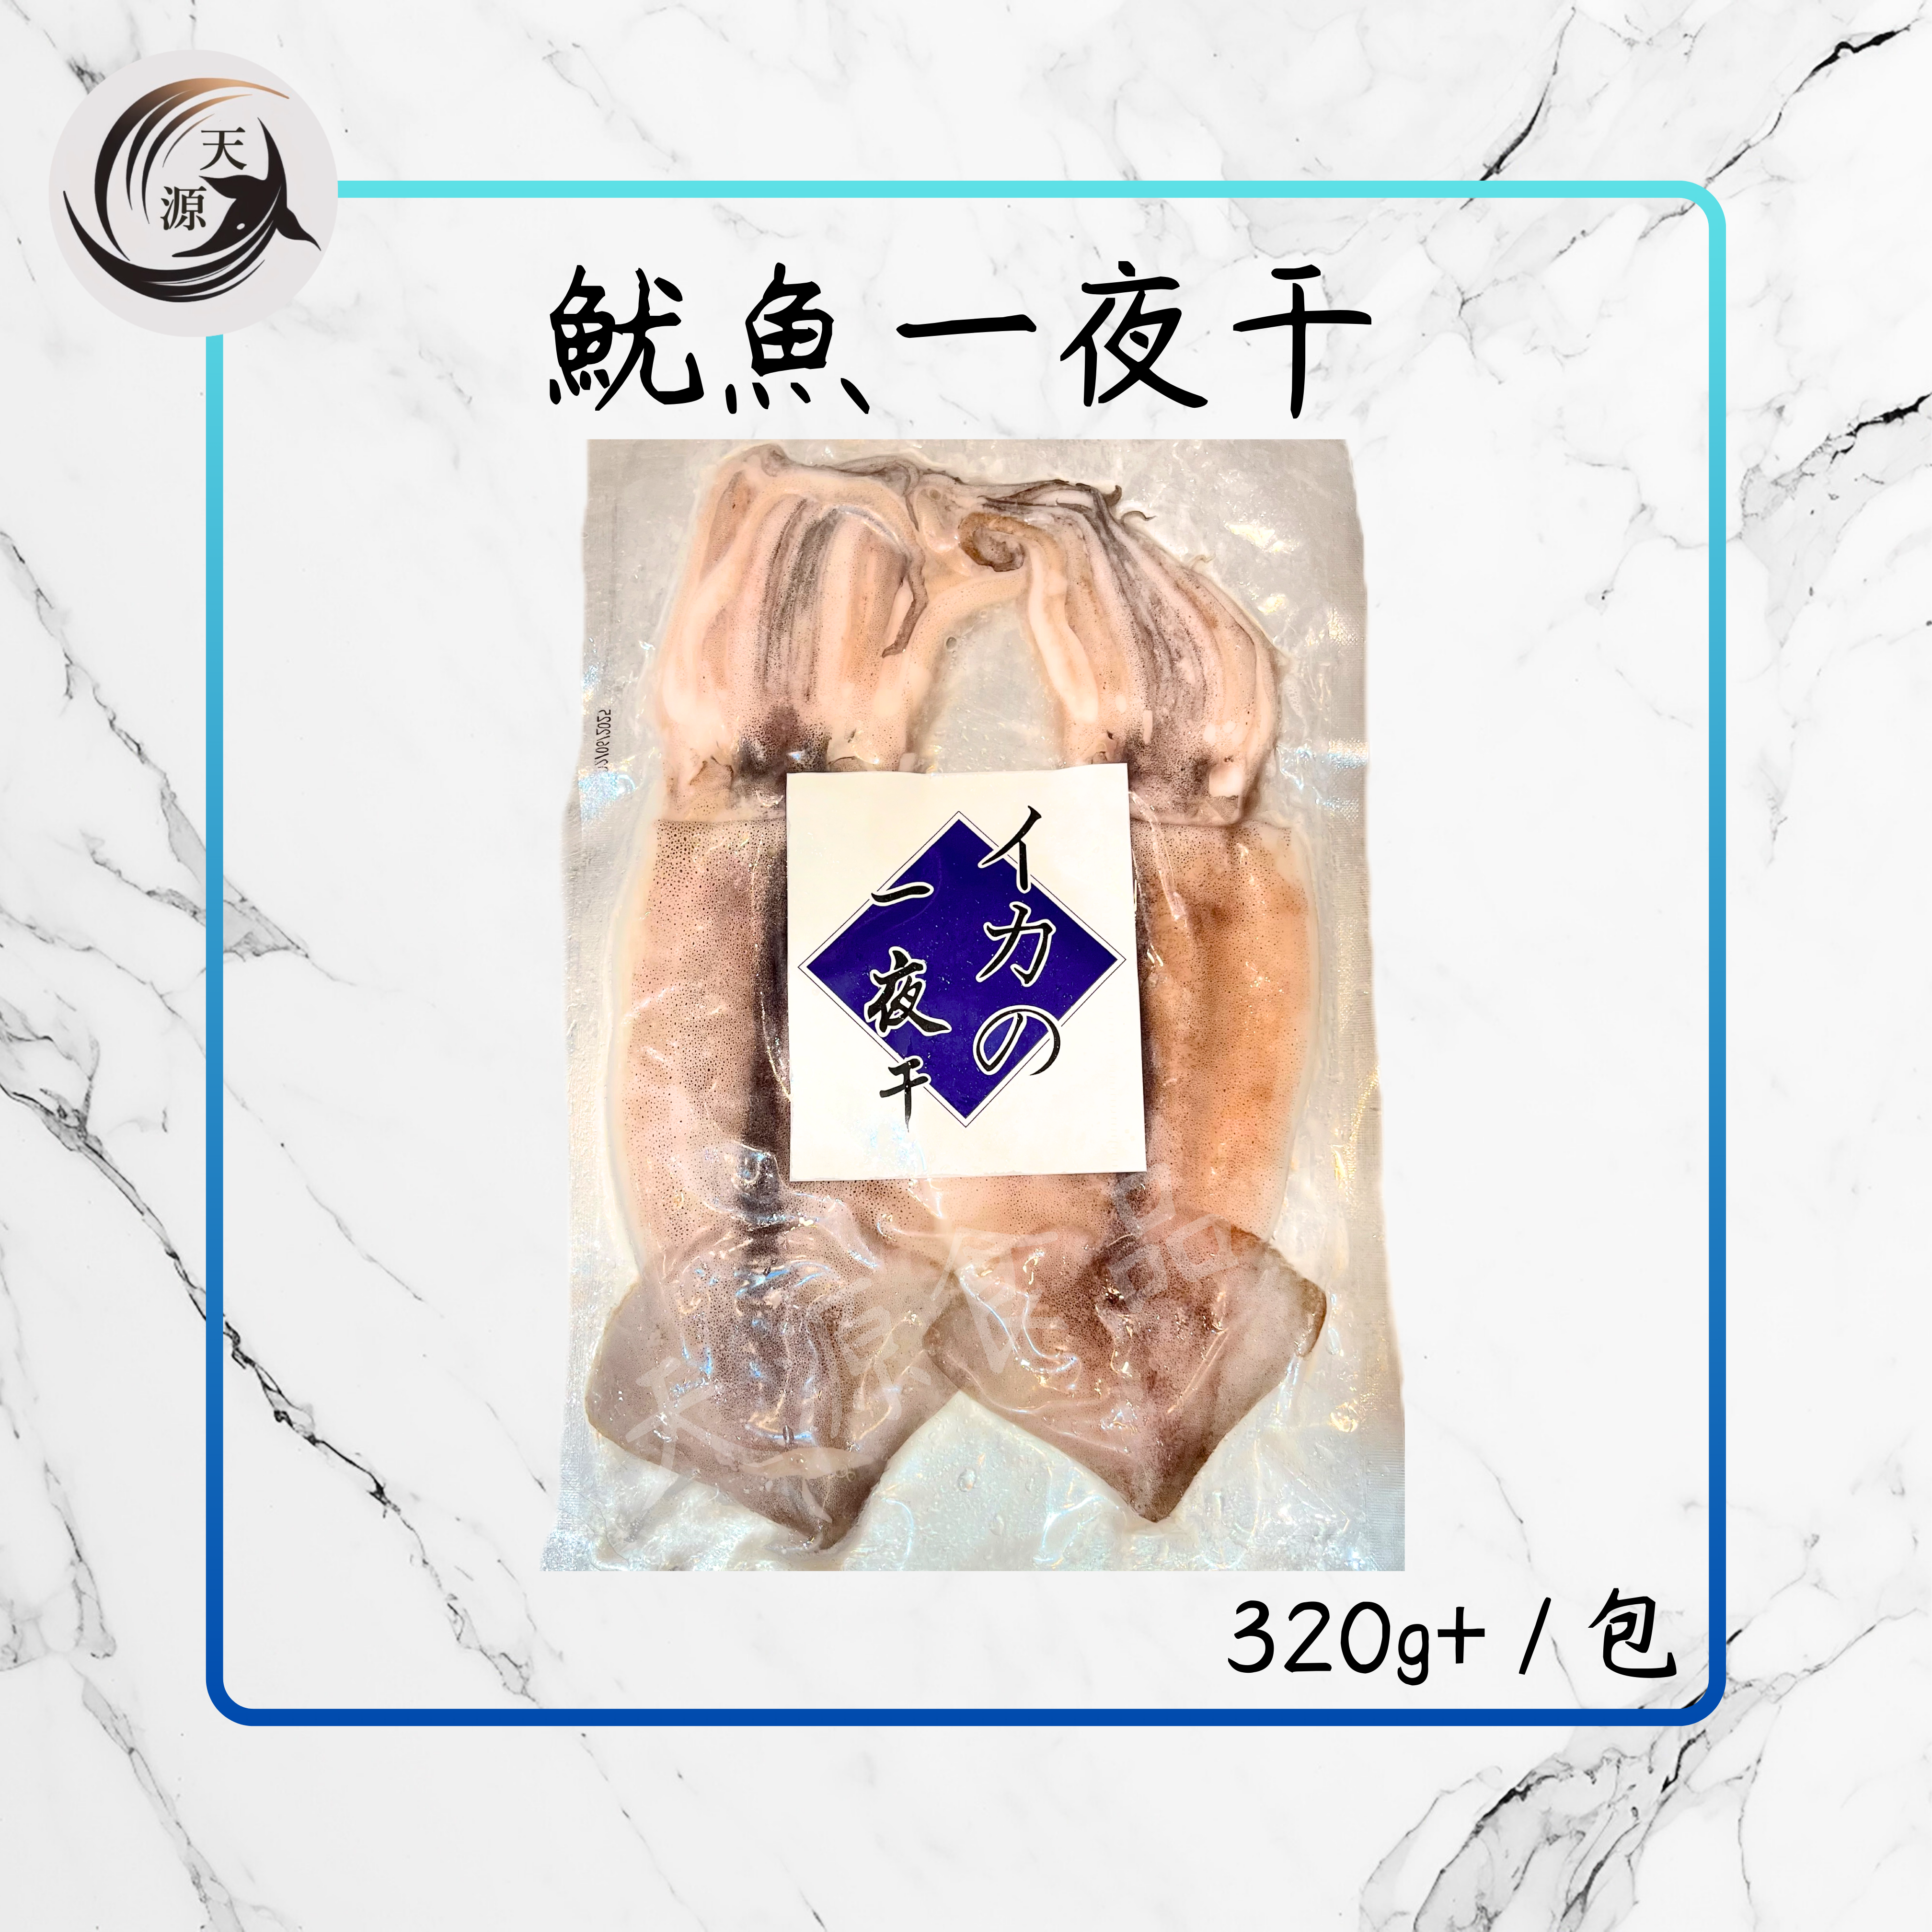 Dried squid overnight 320g/pack 2 pieces